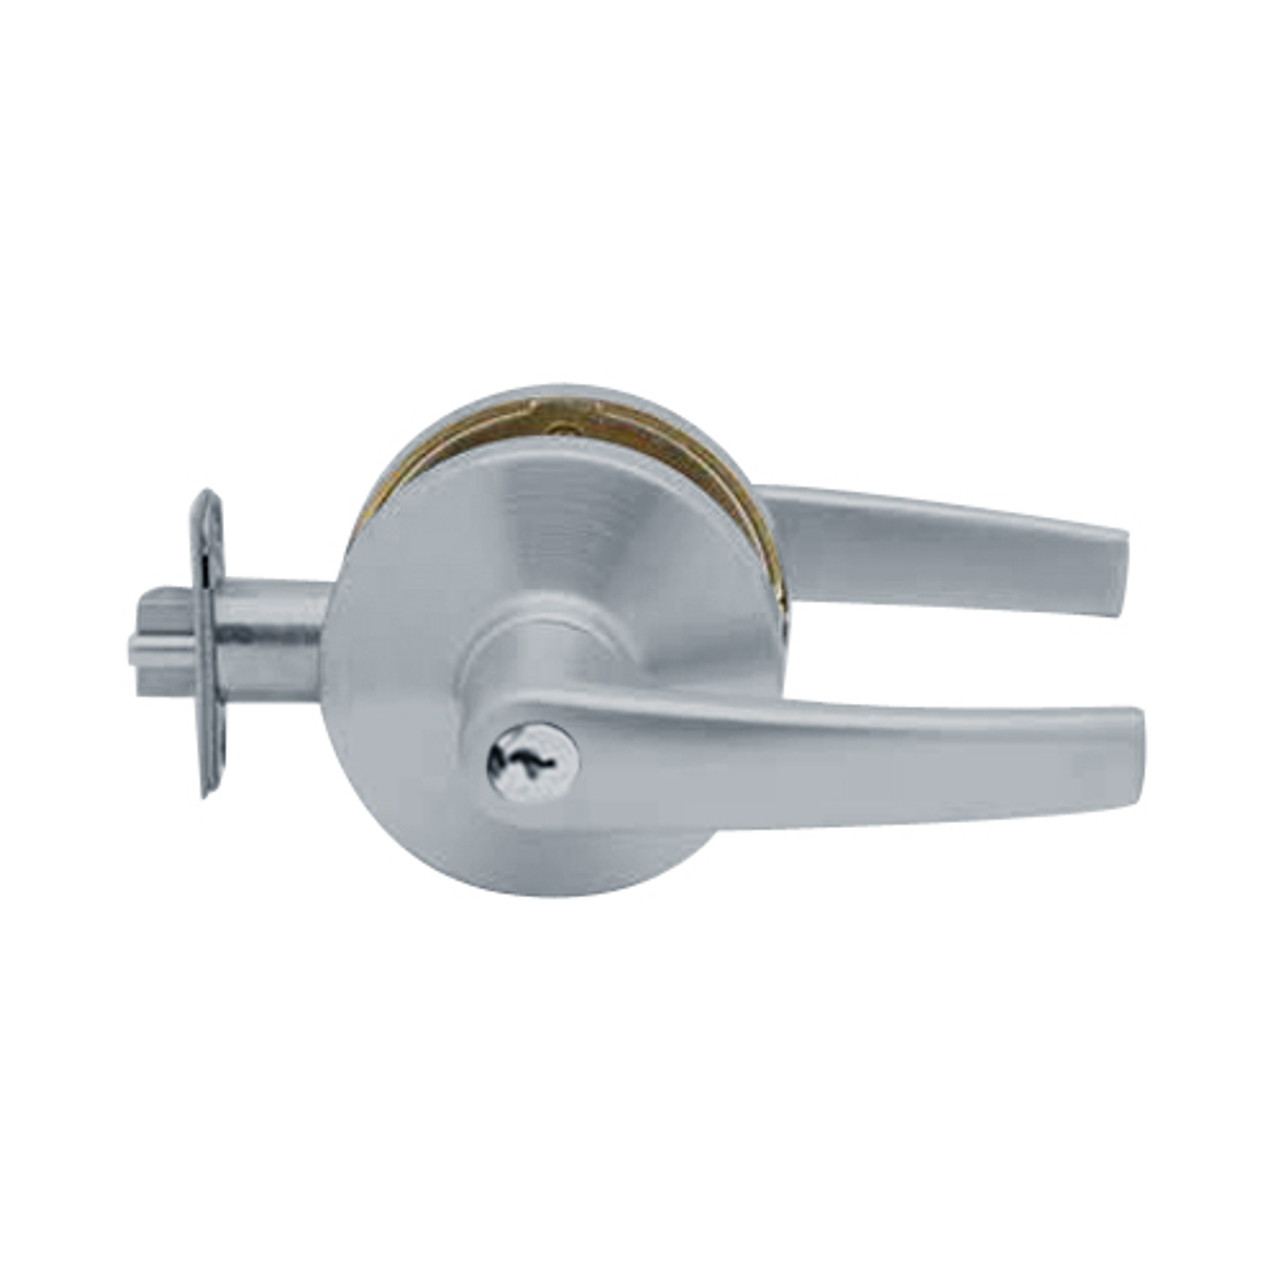 K571PD-A-626 Falcon K Series Single Cylinder Dormitory/Corridor Lock with Avalon Lever Style in Satin Chrome Finish